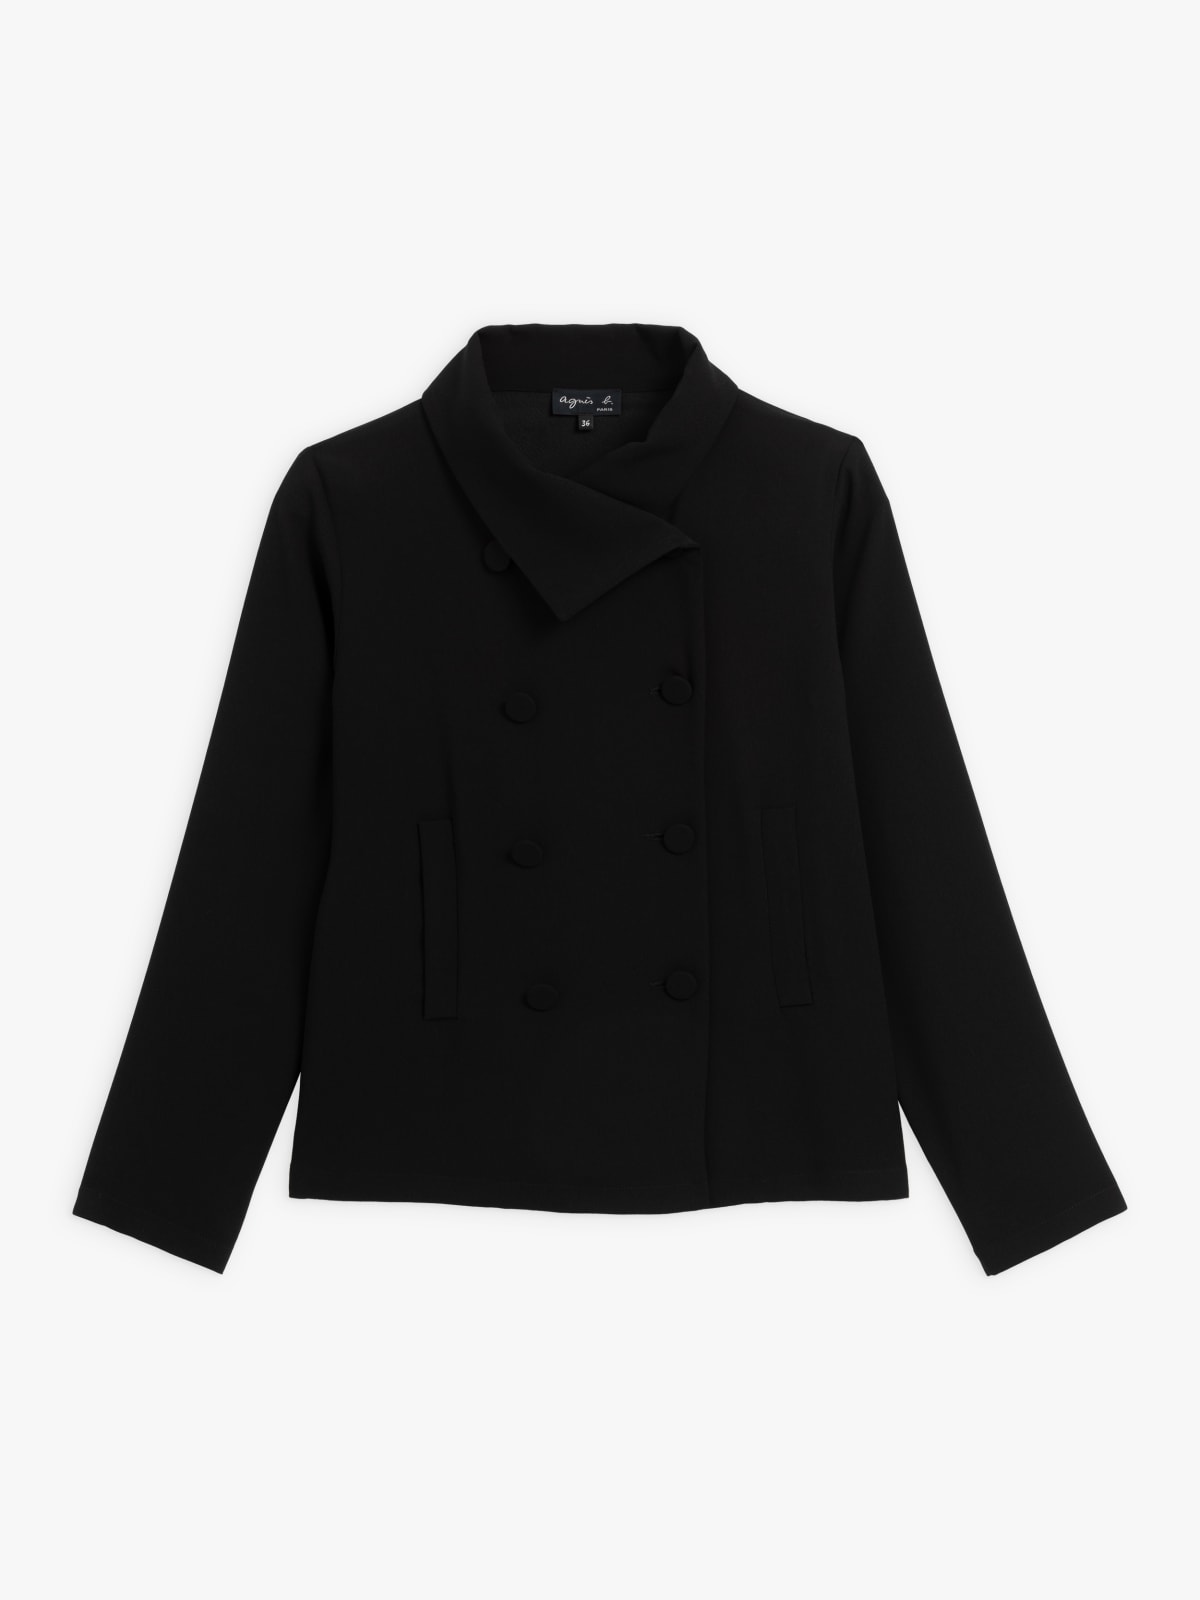 black double-breasted jacket